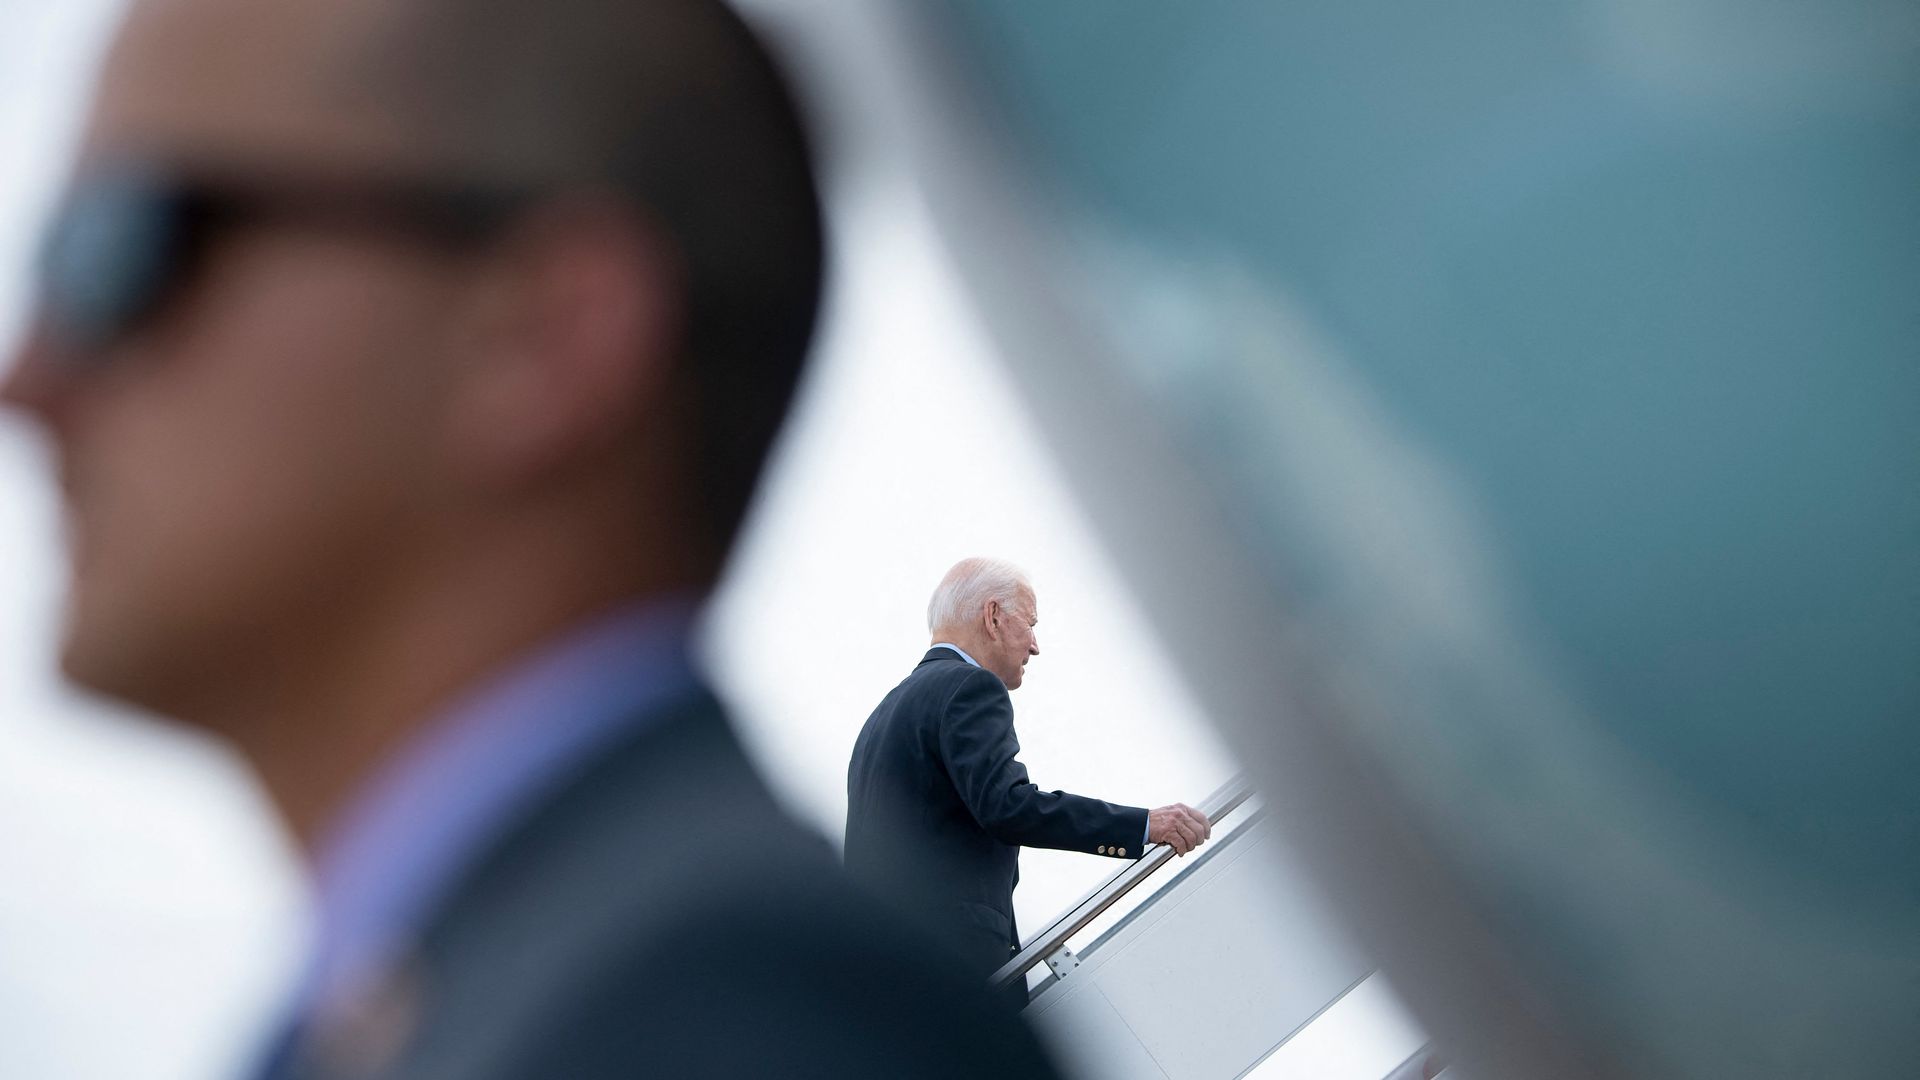 President Biden is seen walking up the steps of Air Force One as he departs for Europe.